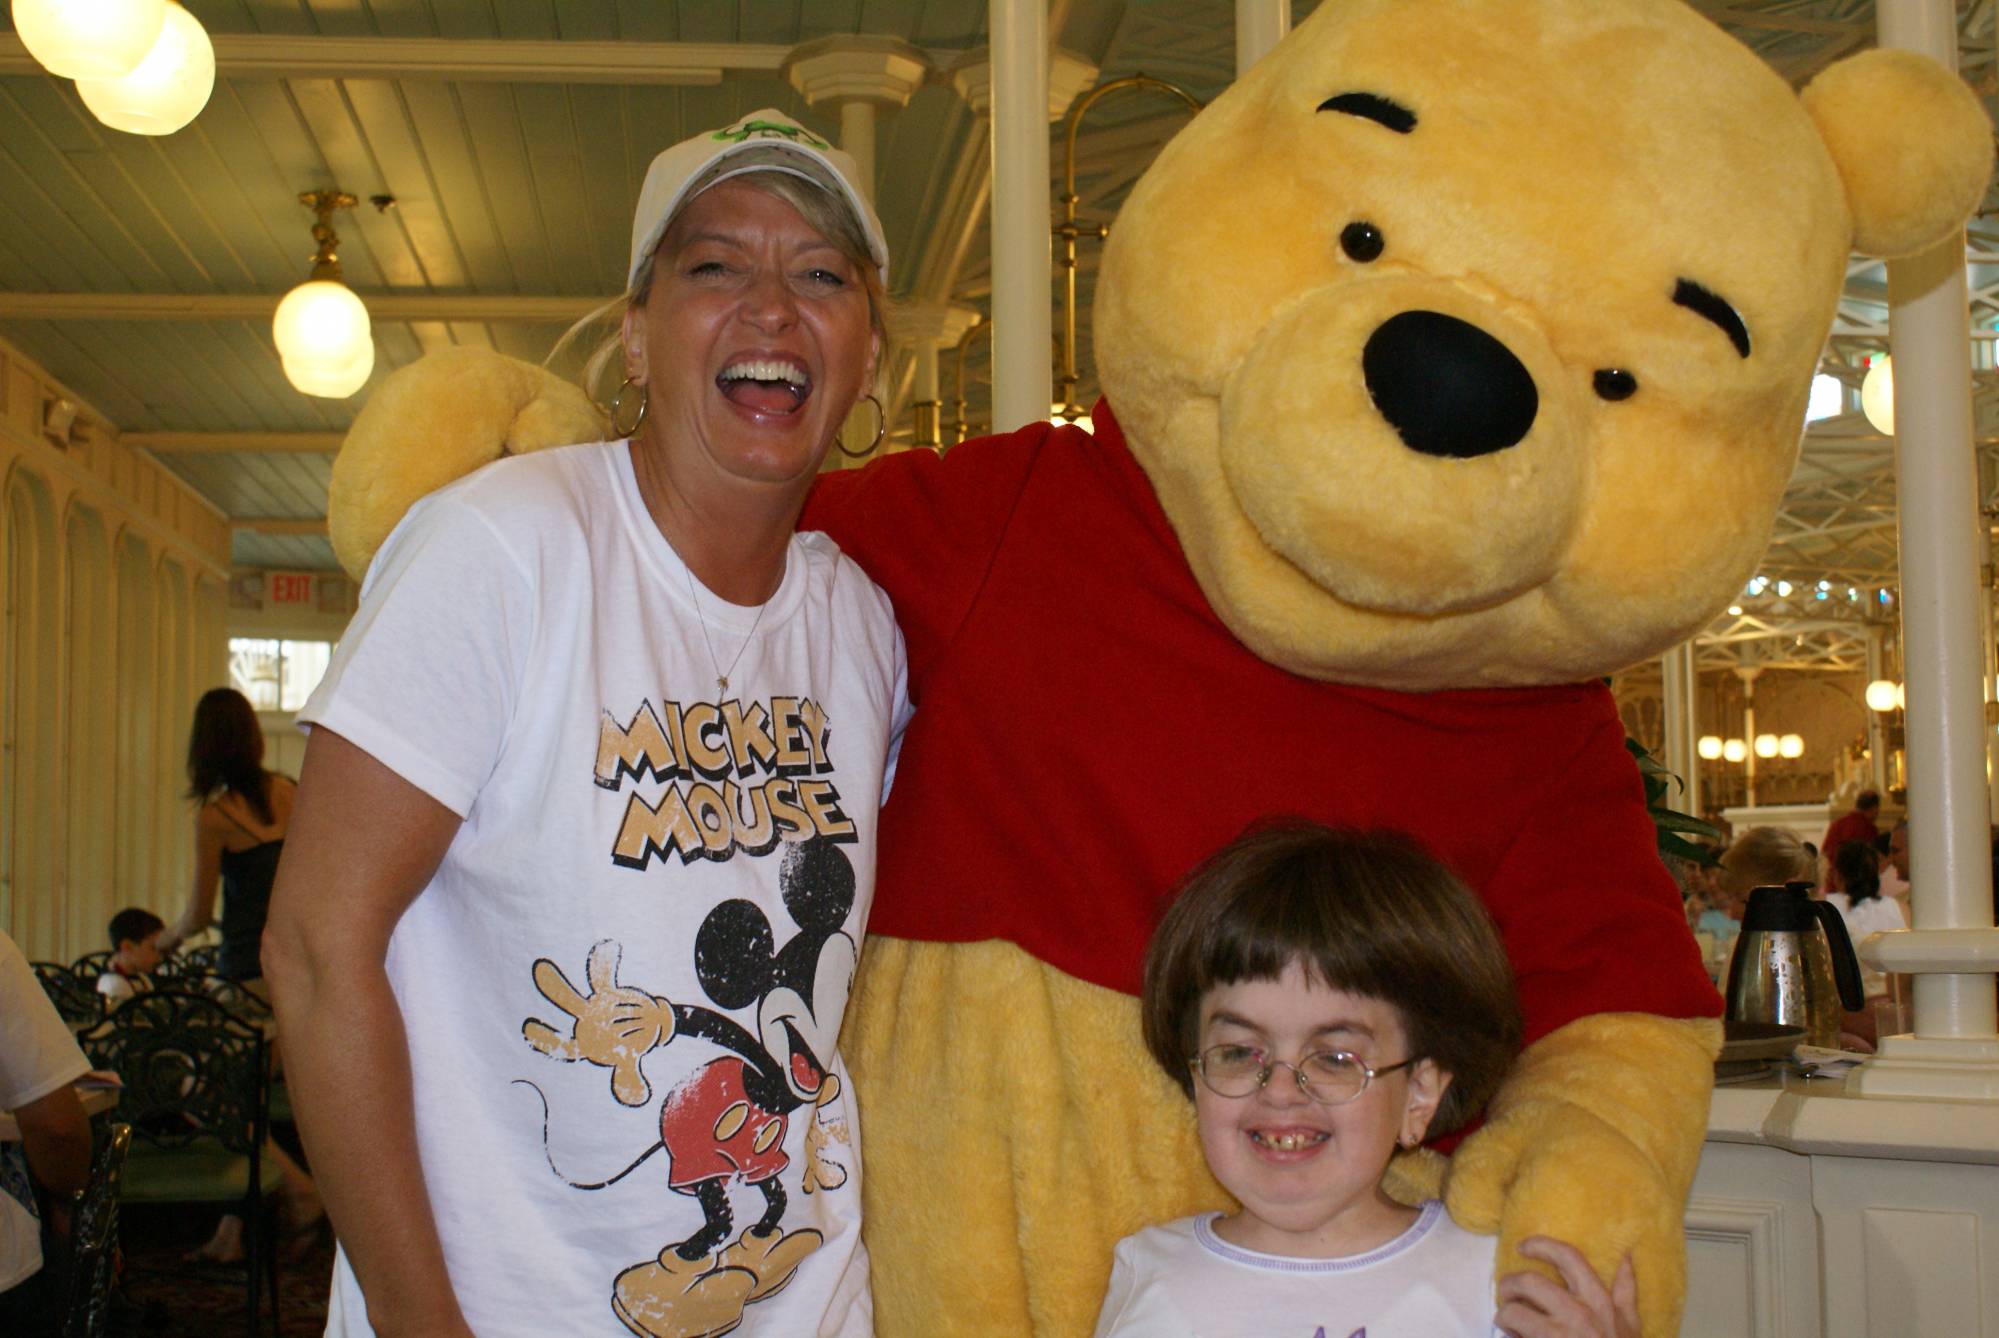 The Girls and Pooh